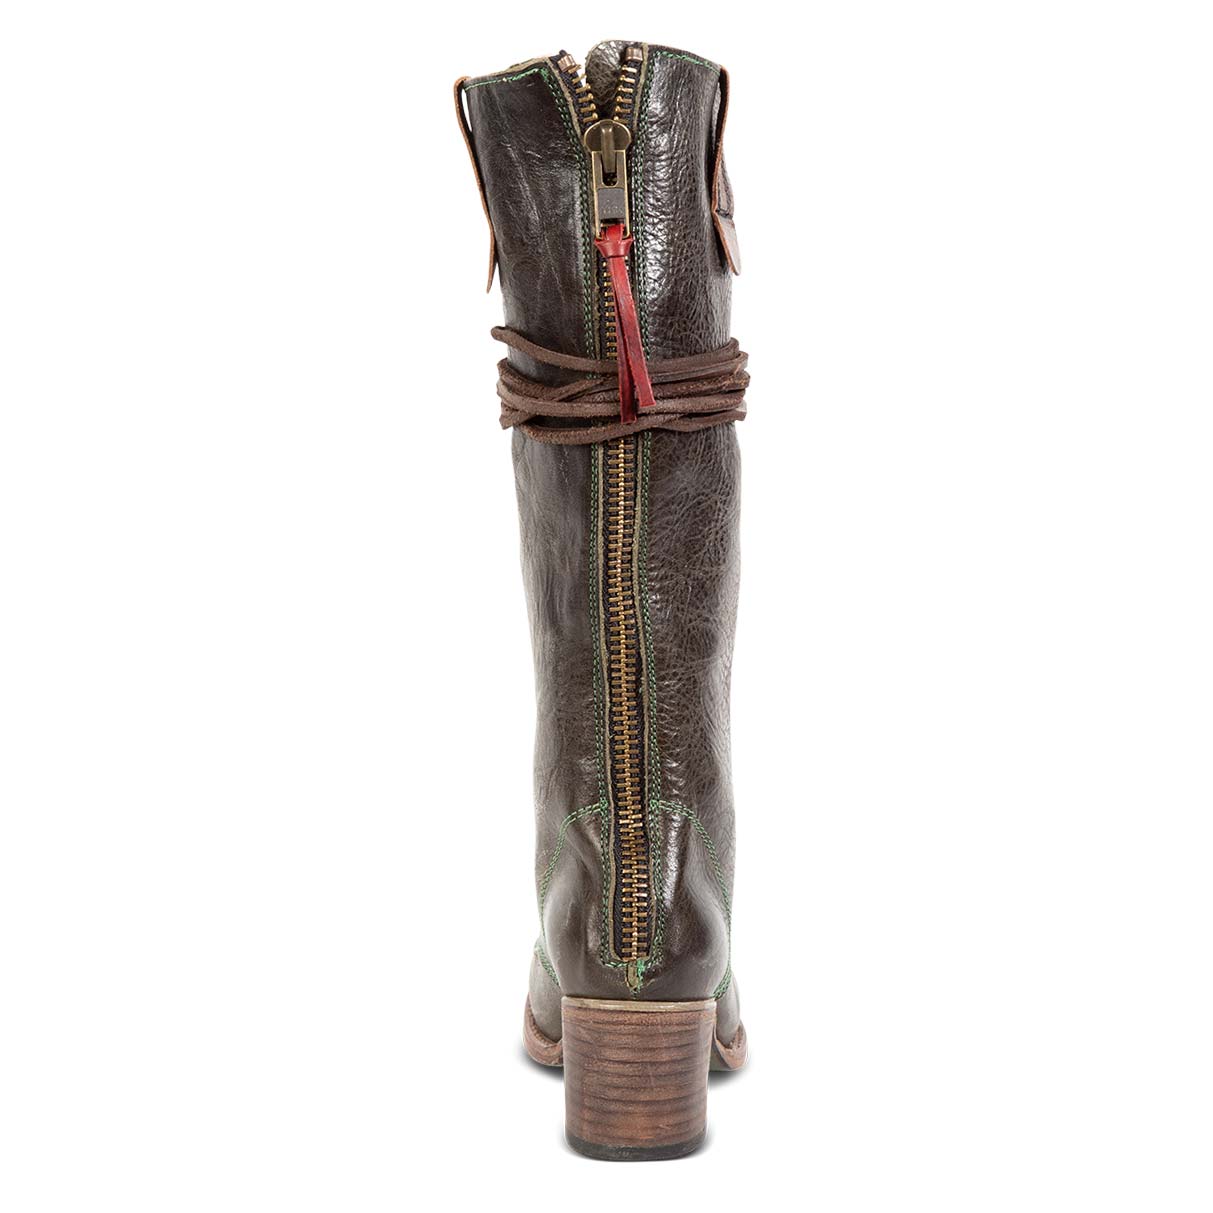 Back view showing brass zip closure and red leather pull tab on FREEBIRD women's Grany olive tall boot